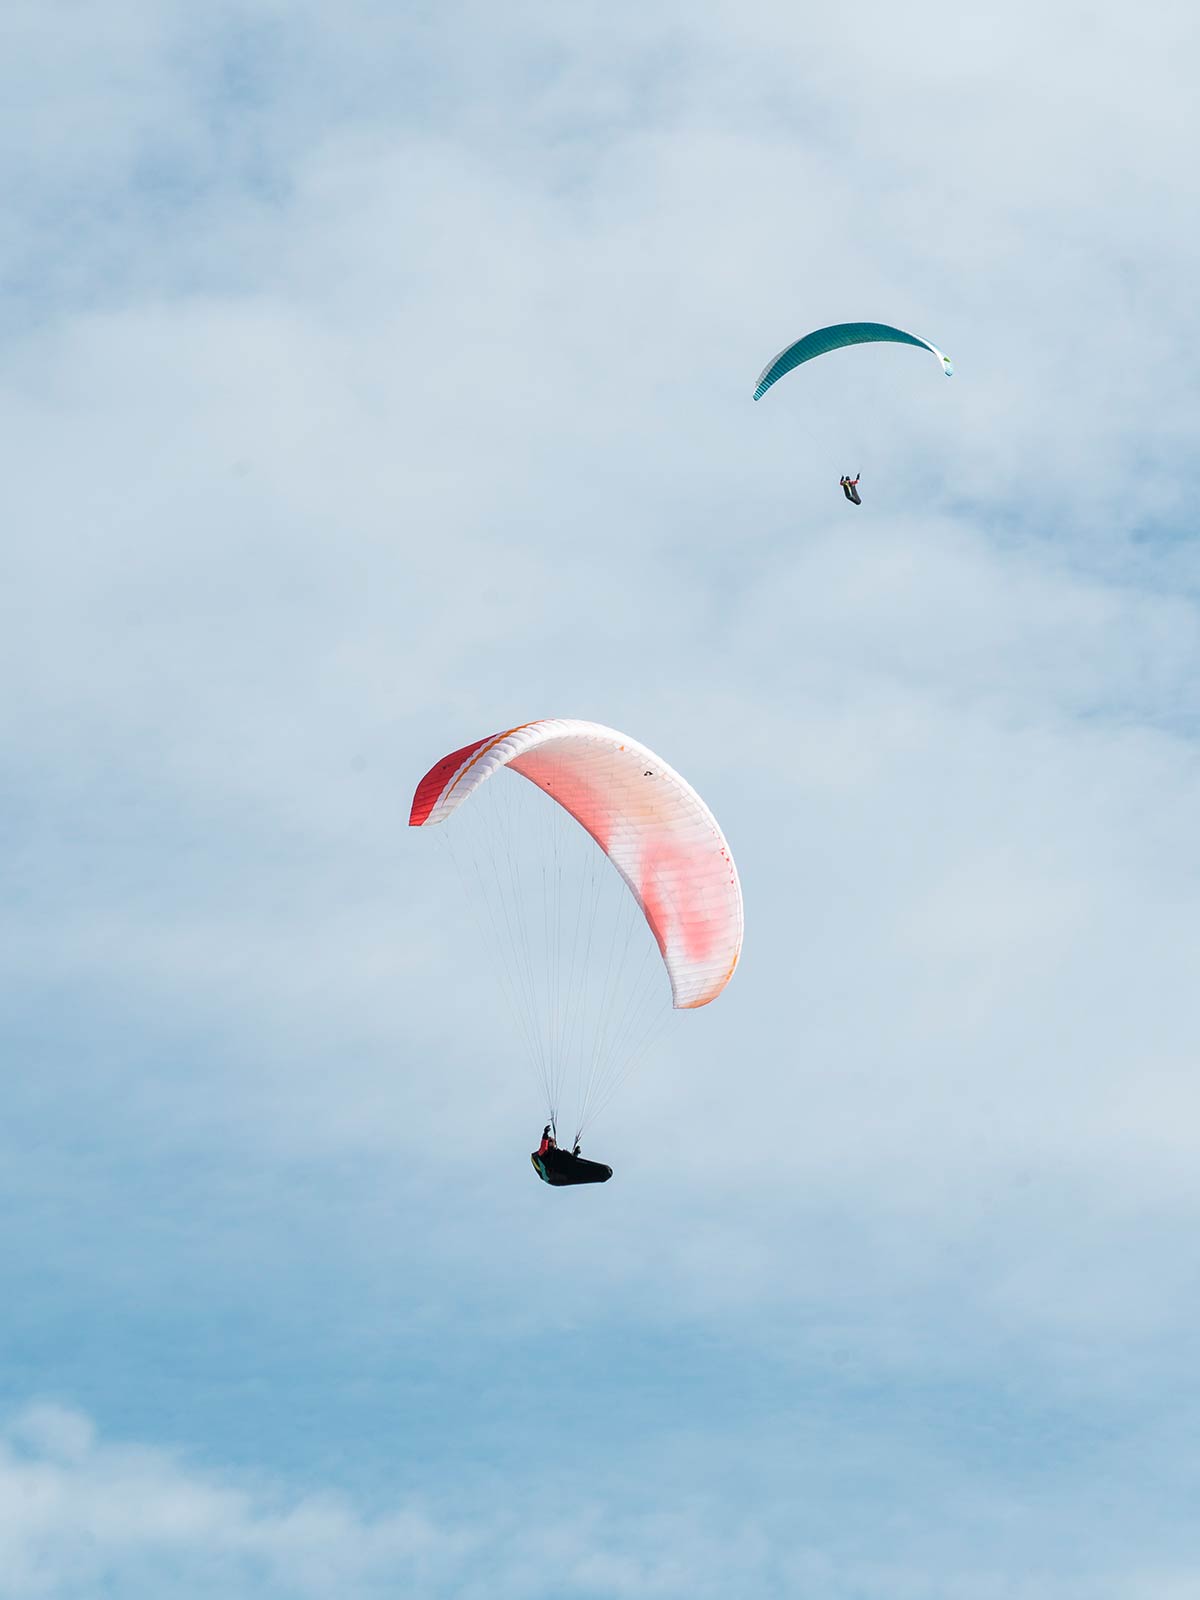 Parapente, Seven Sisters, East Sussex, Angleterre, Royaume-Uni / Parasailing, East Sussex, England, UK